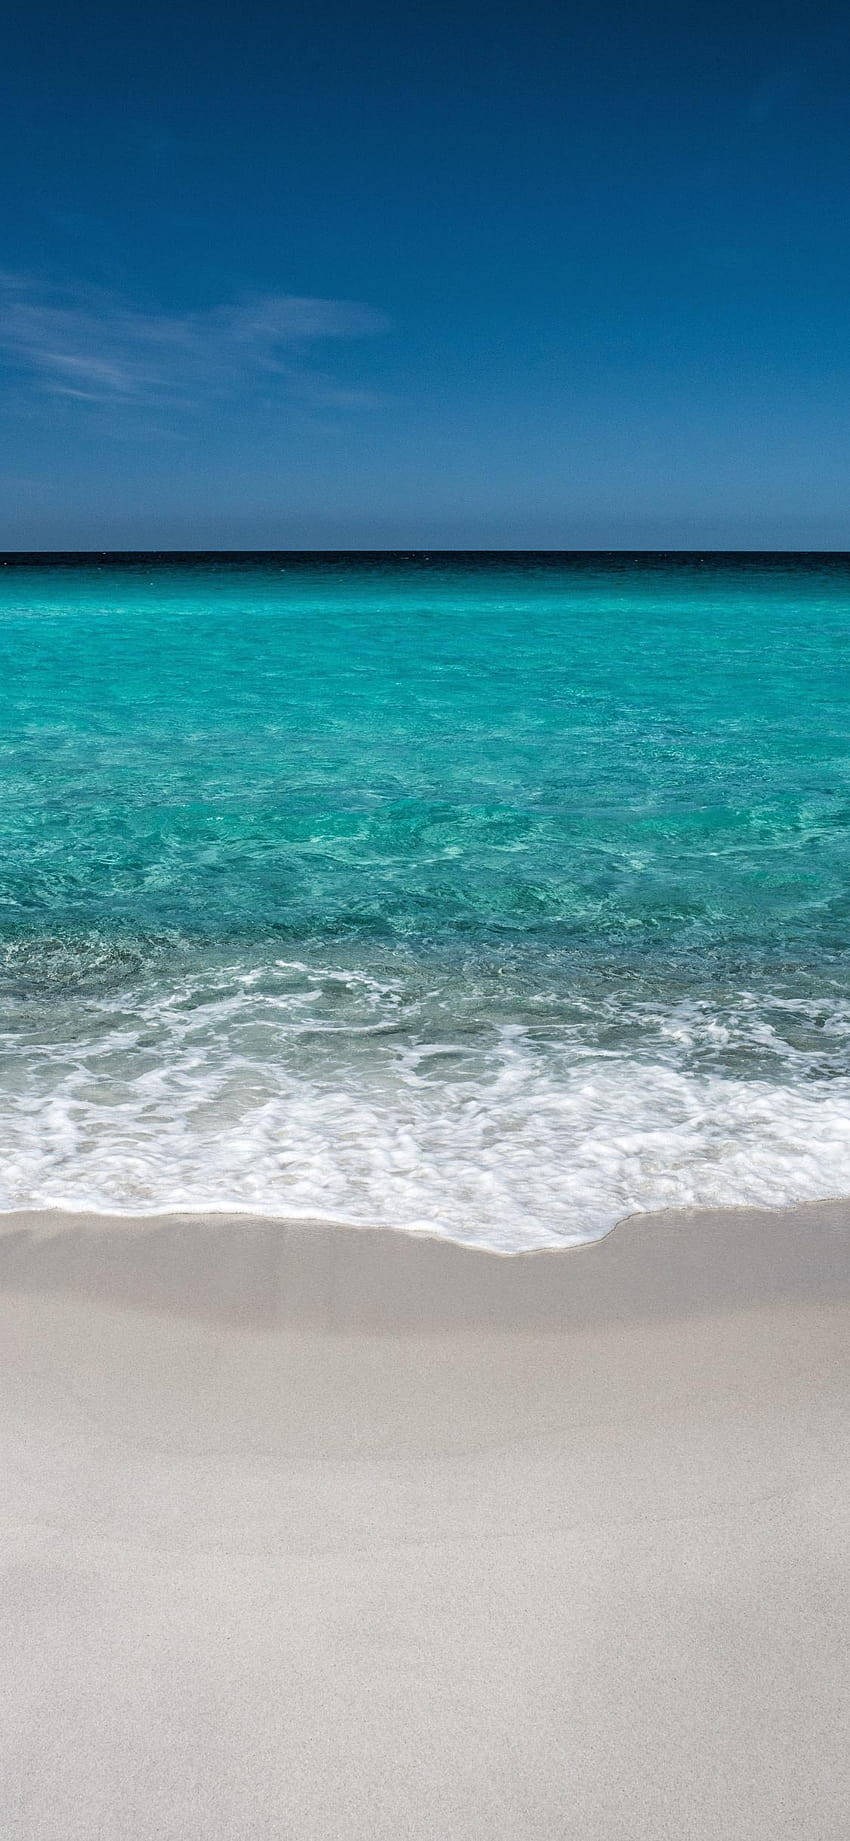 iPhone X Beach And Open Sea Wallpaper